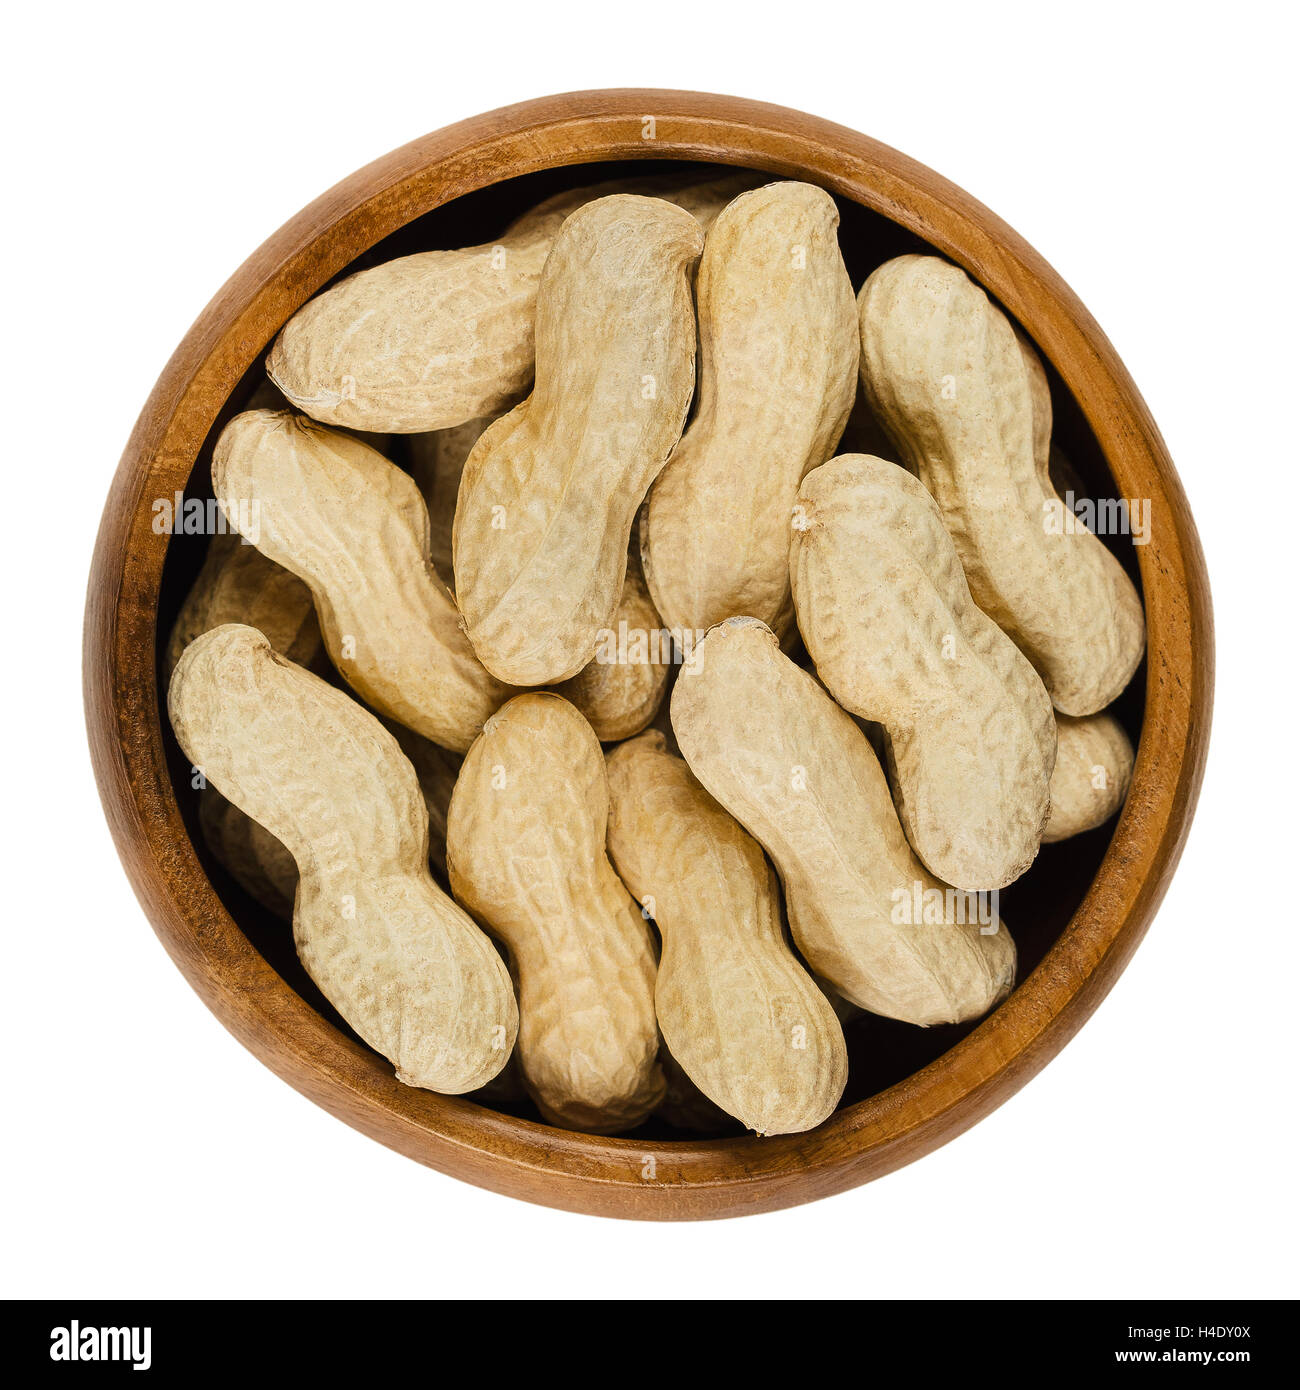 Peanuts with shell in wooden bowl over white, also called groundnut and goober. Dry roasted whole pods of Arachis hypogaea. Stock Photo